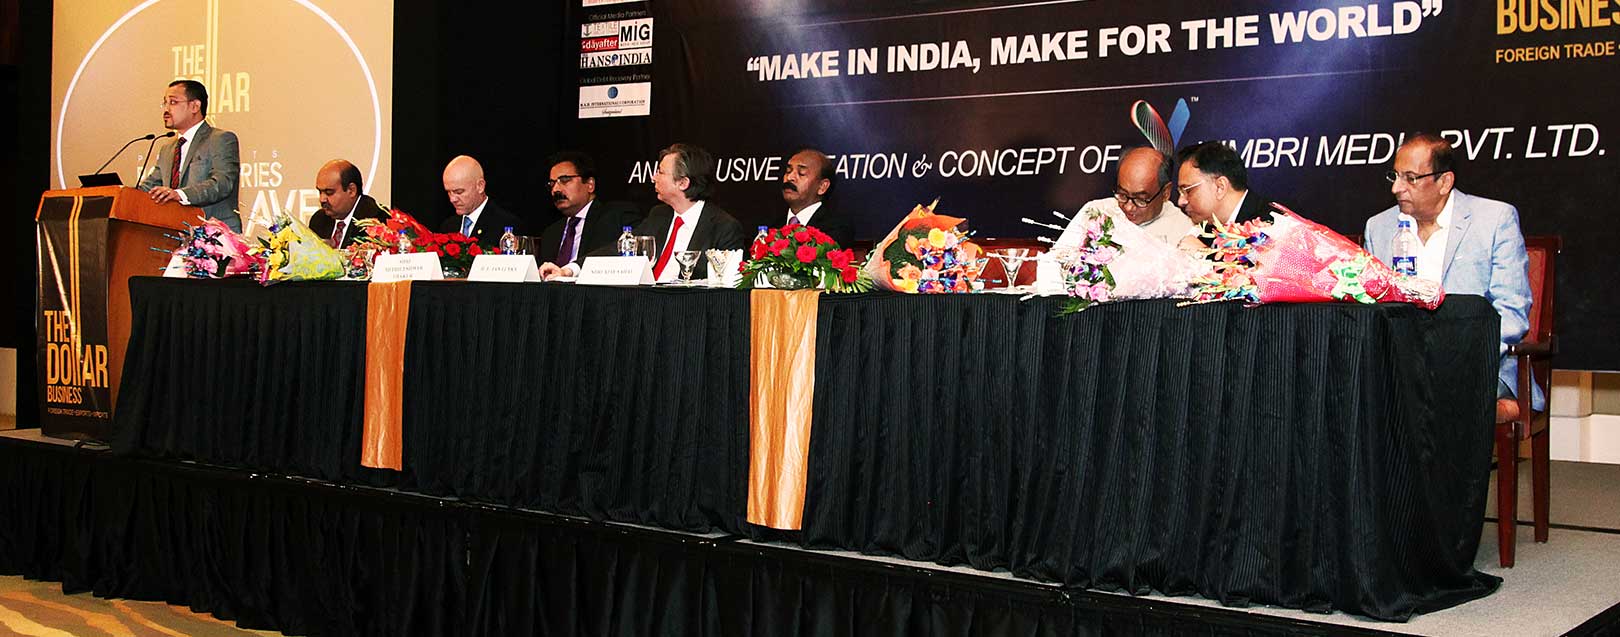 The Dollar Business organises Power Series Conclave on Aug 24